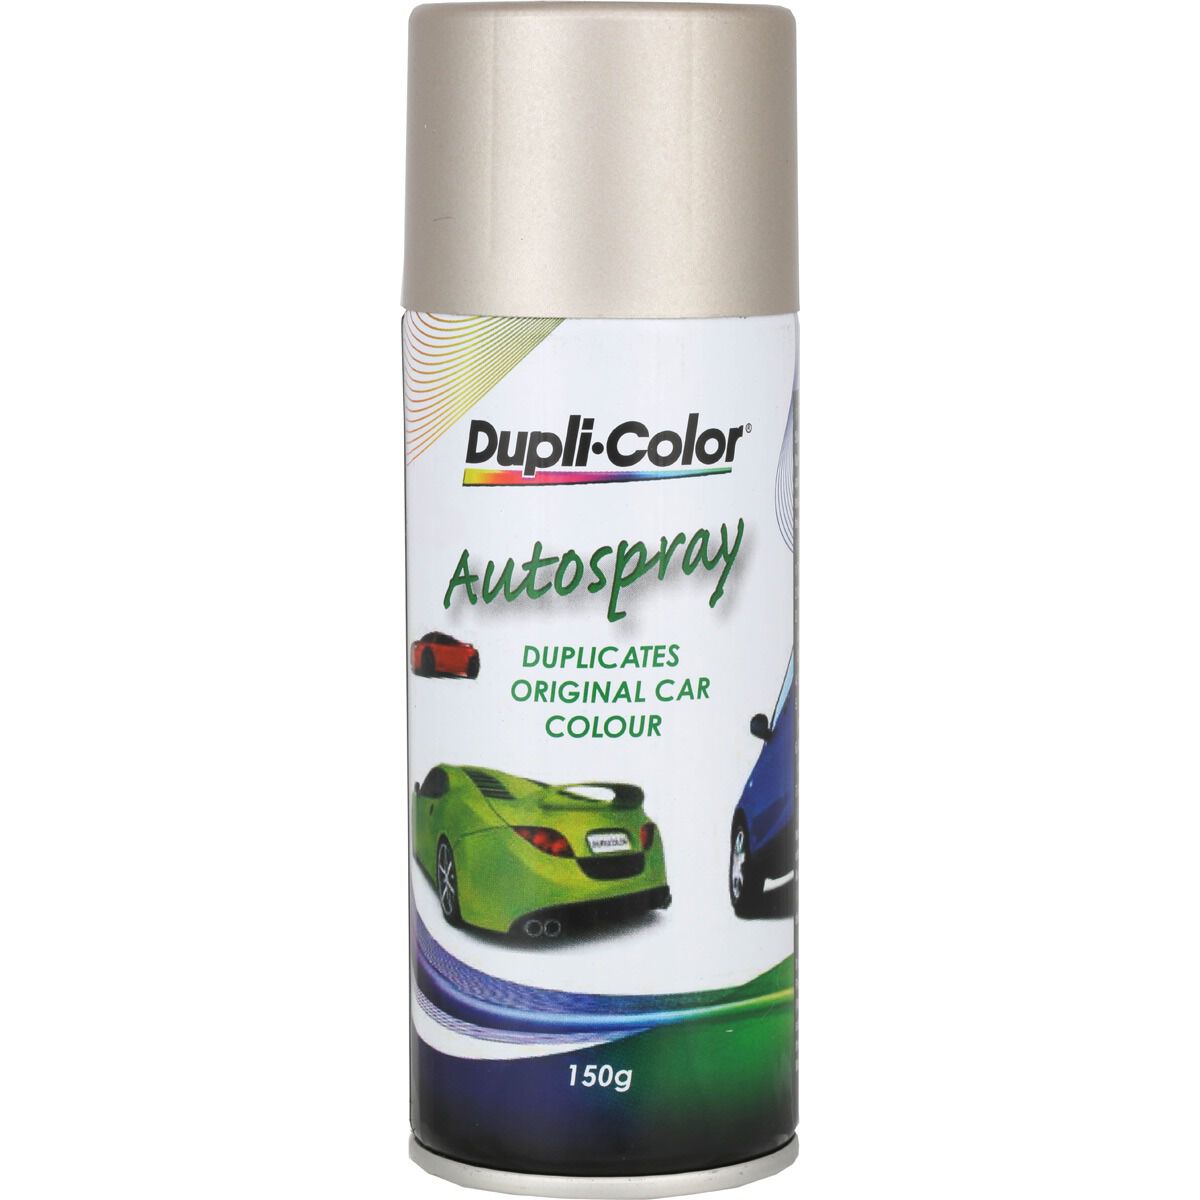 Dupli-Color Touch-Up Paint Holden Antelope, DSH25 - 150g, , scaau_hi-res